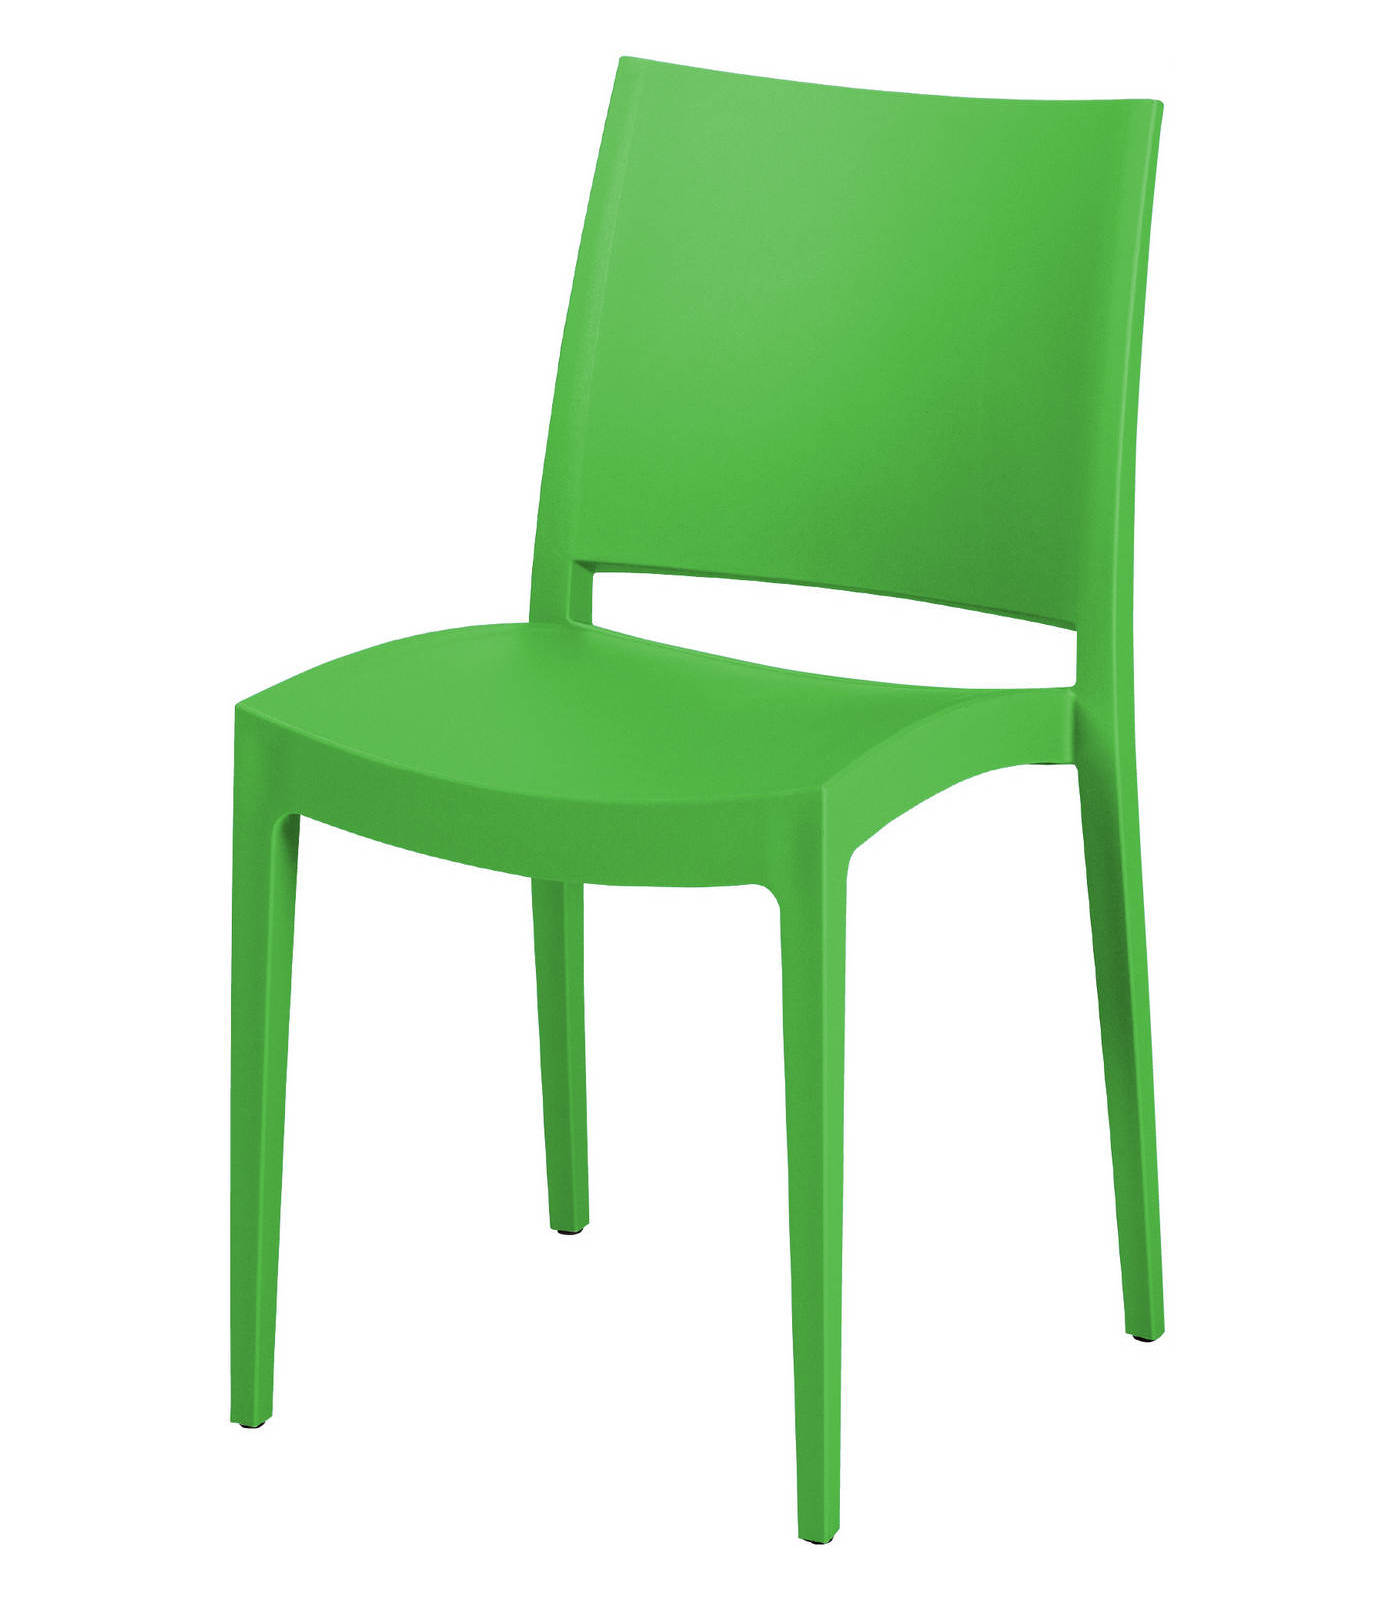 green-chair-printable-outline-clipart-paper-party-kids-craft